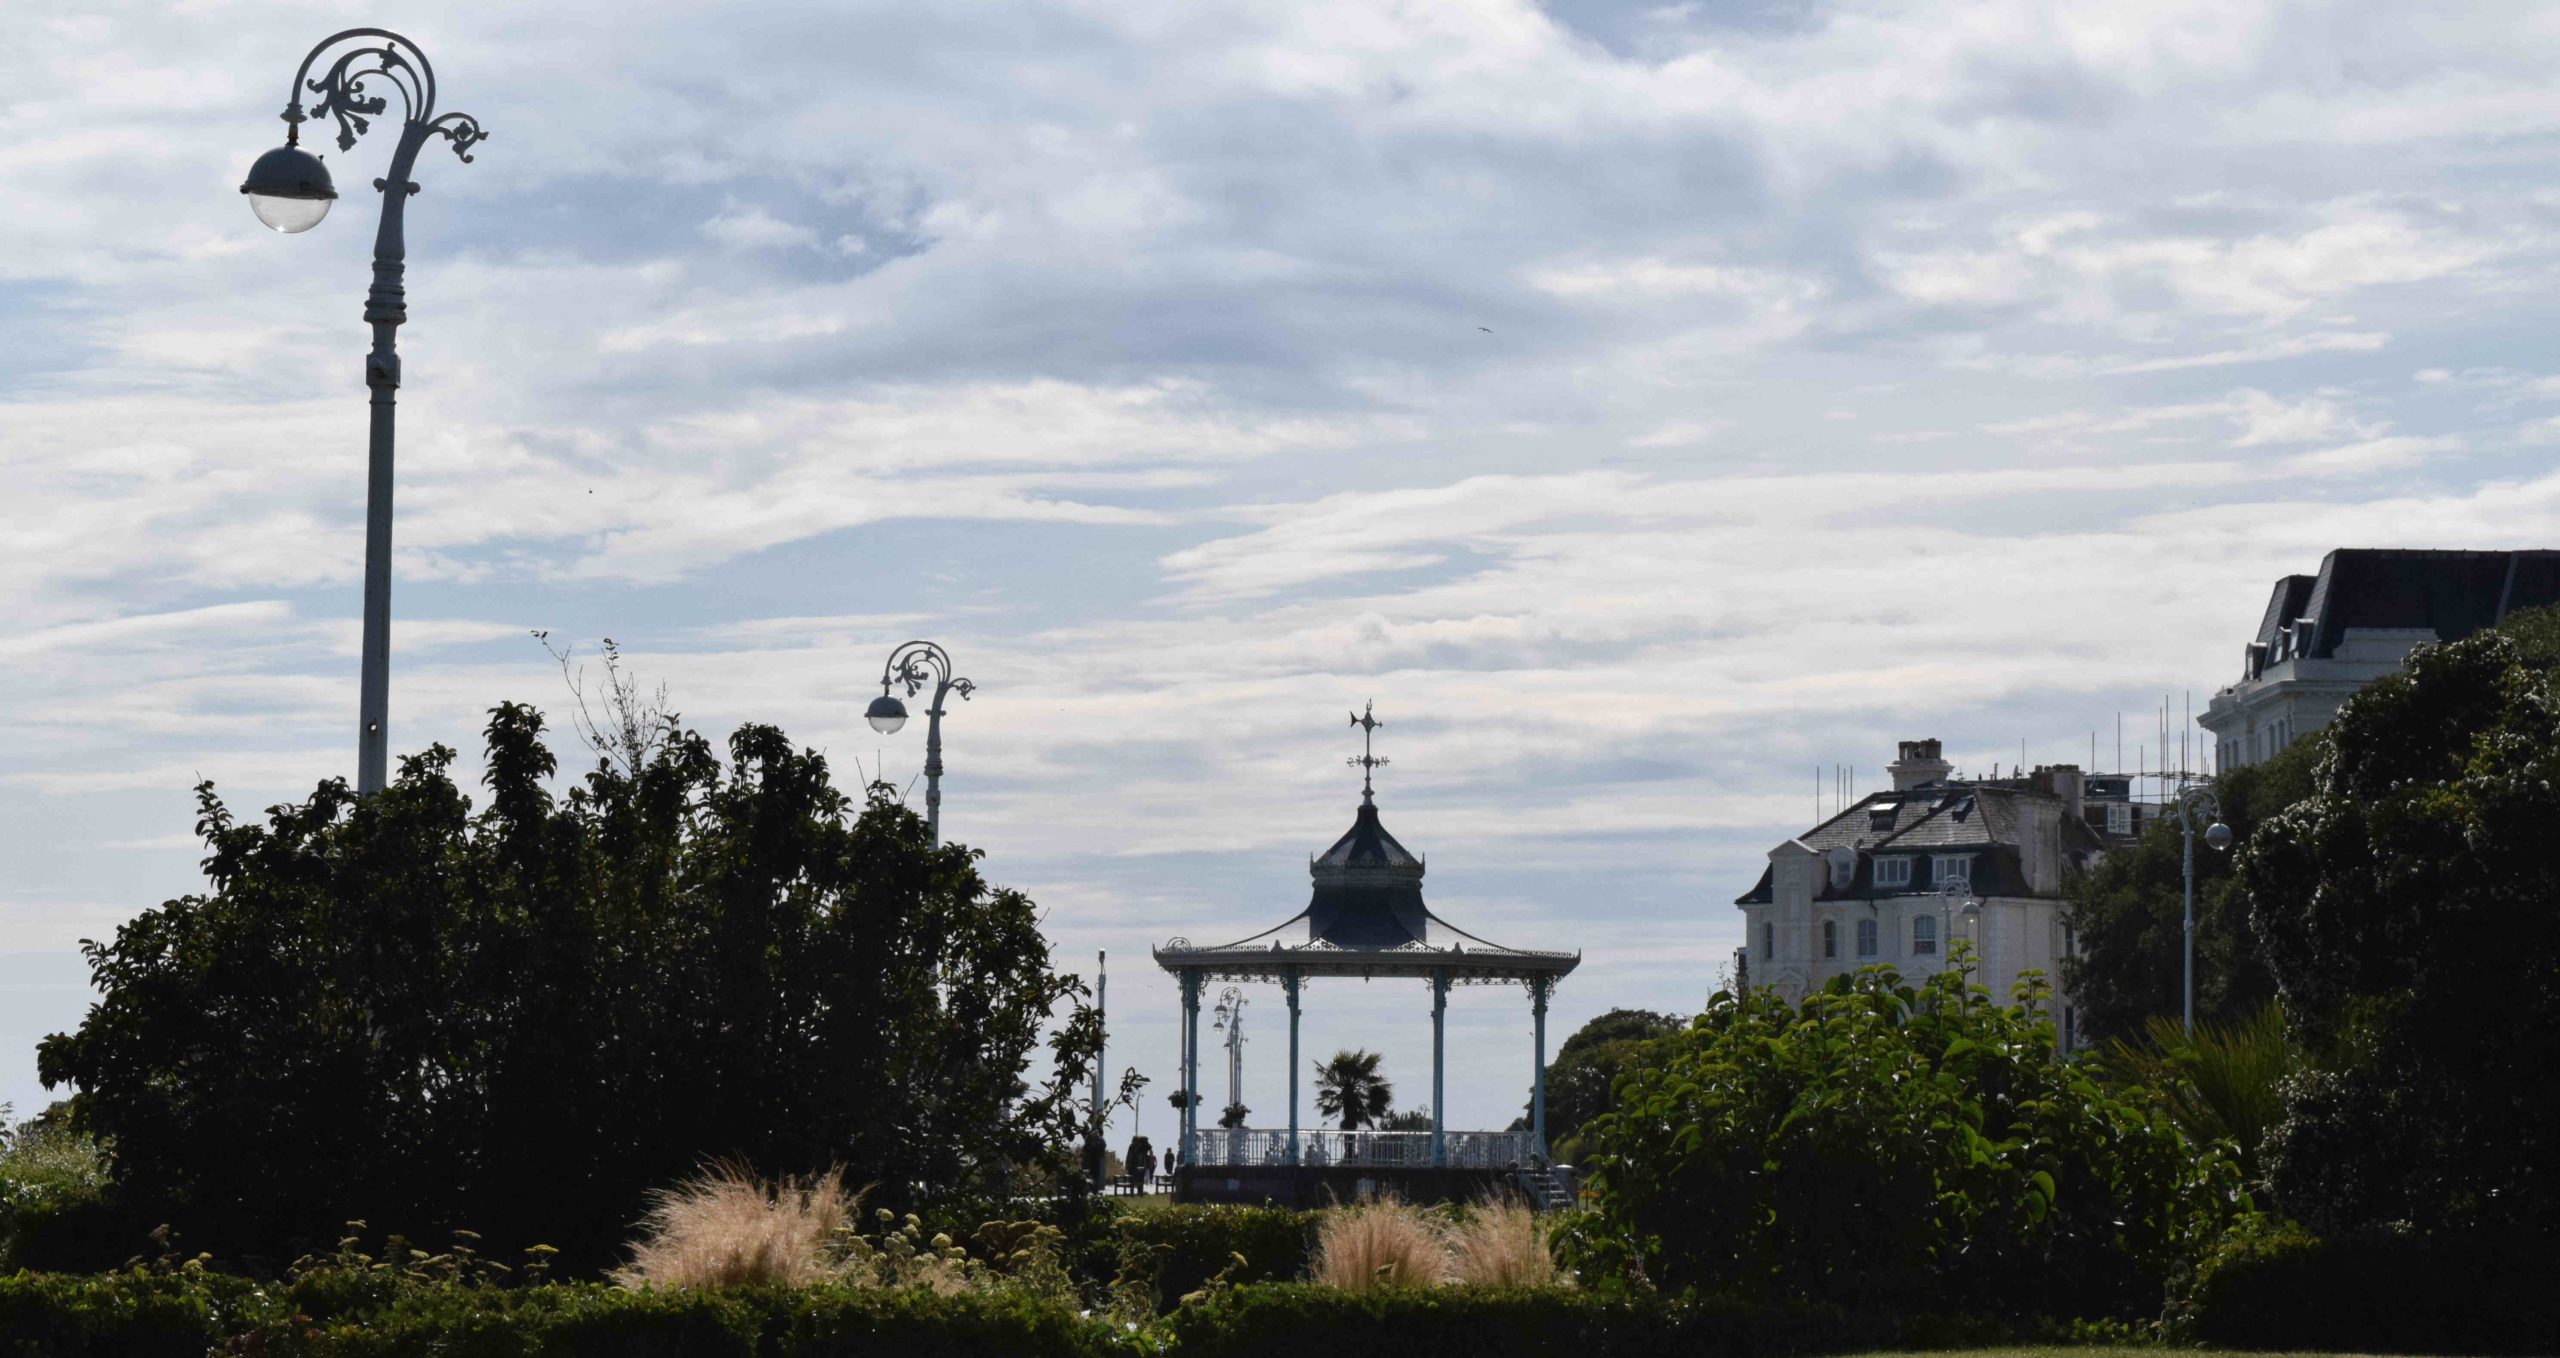 The Bandstand on The Leas